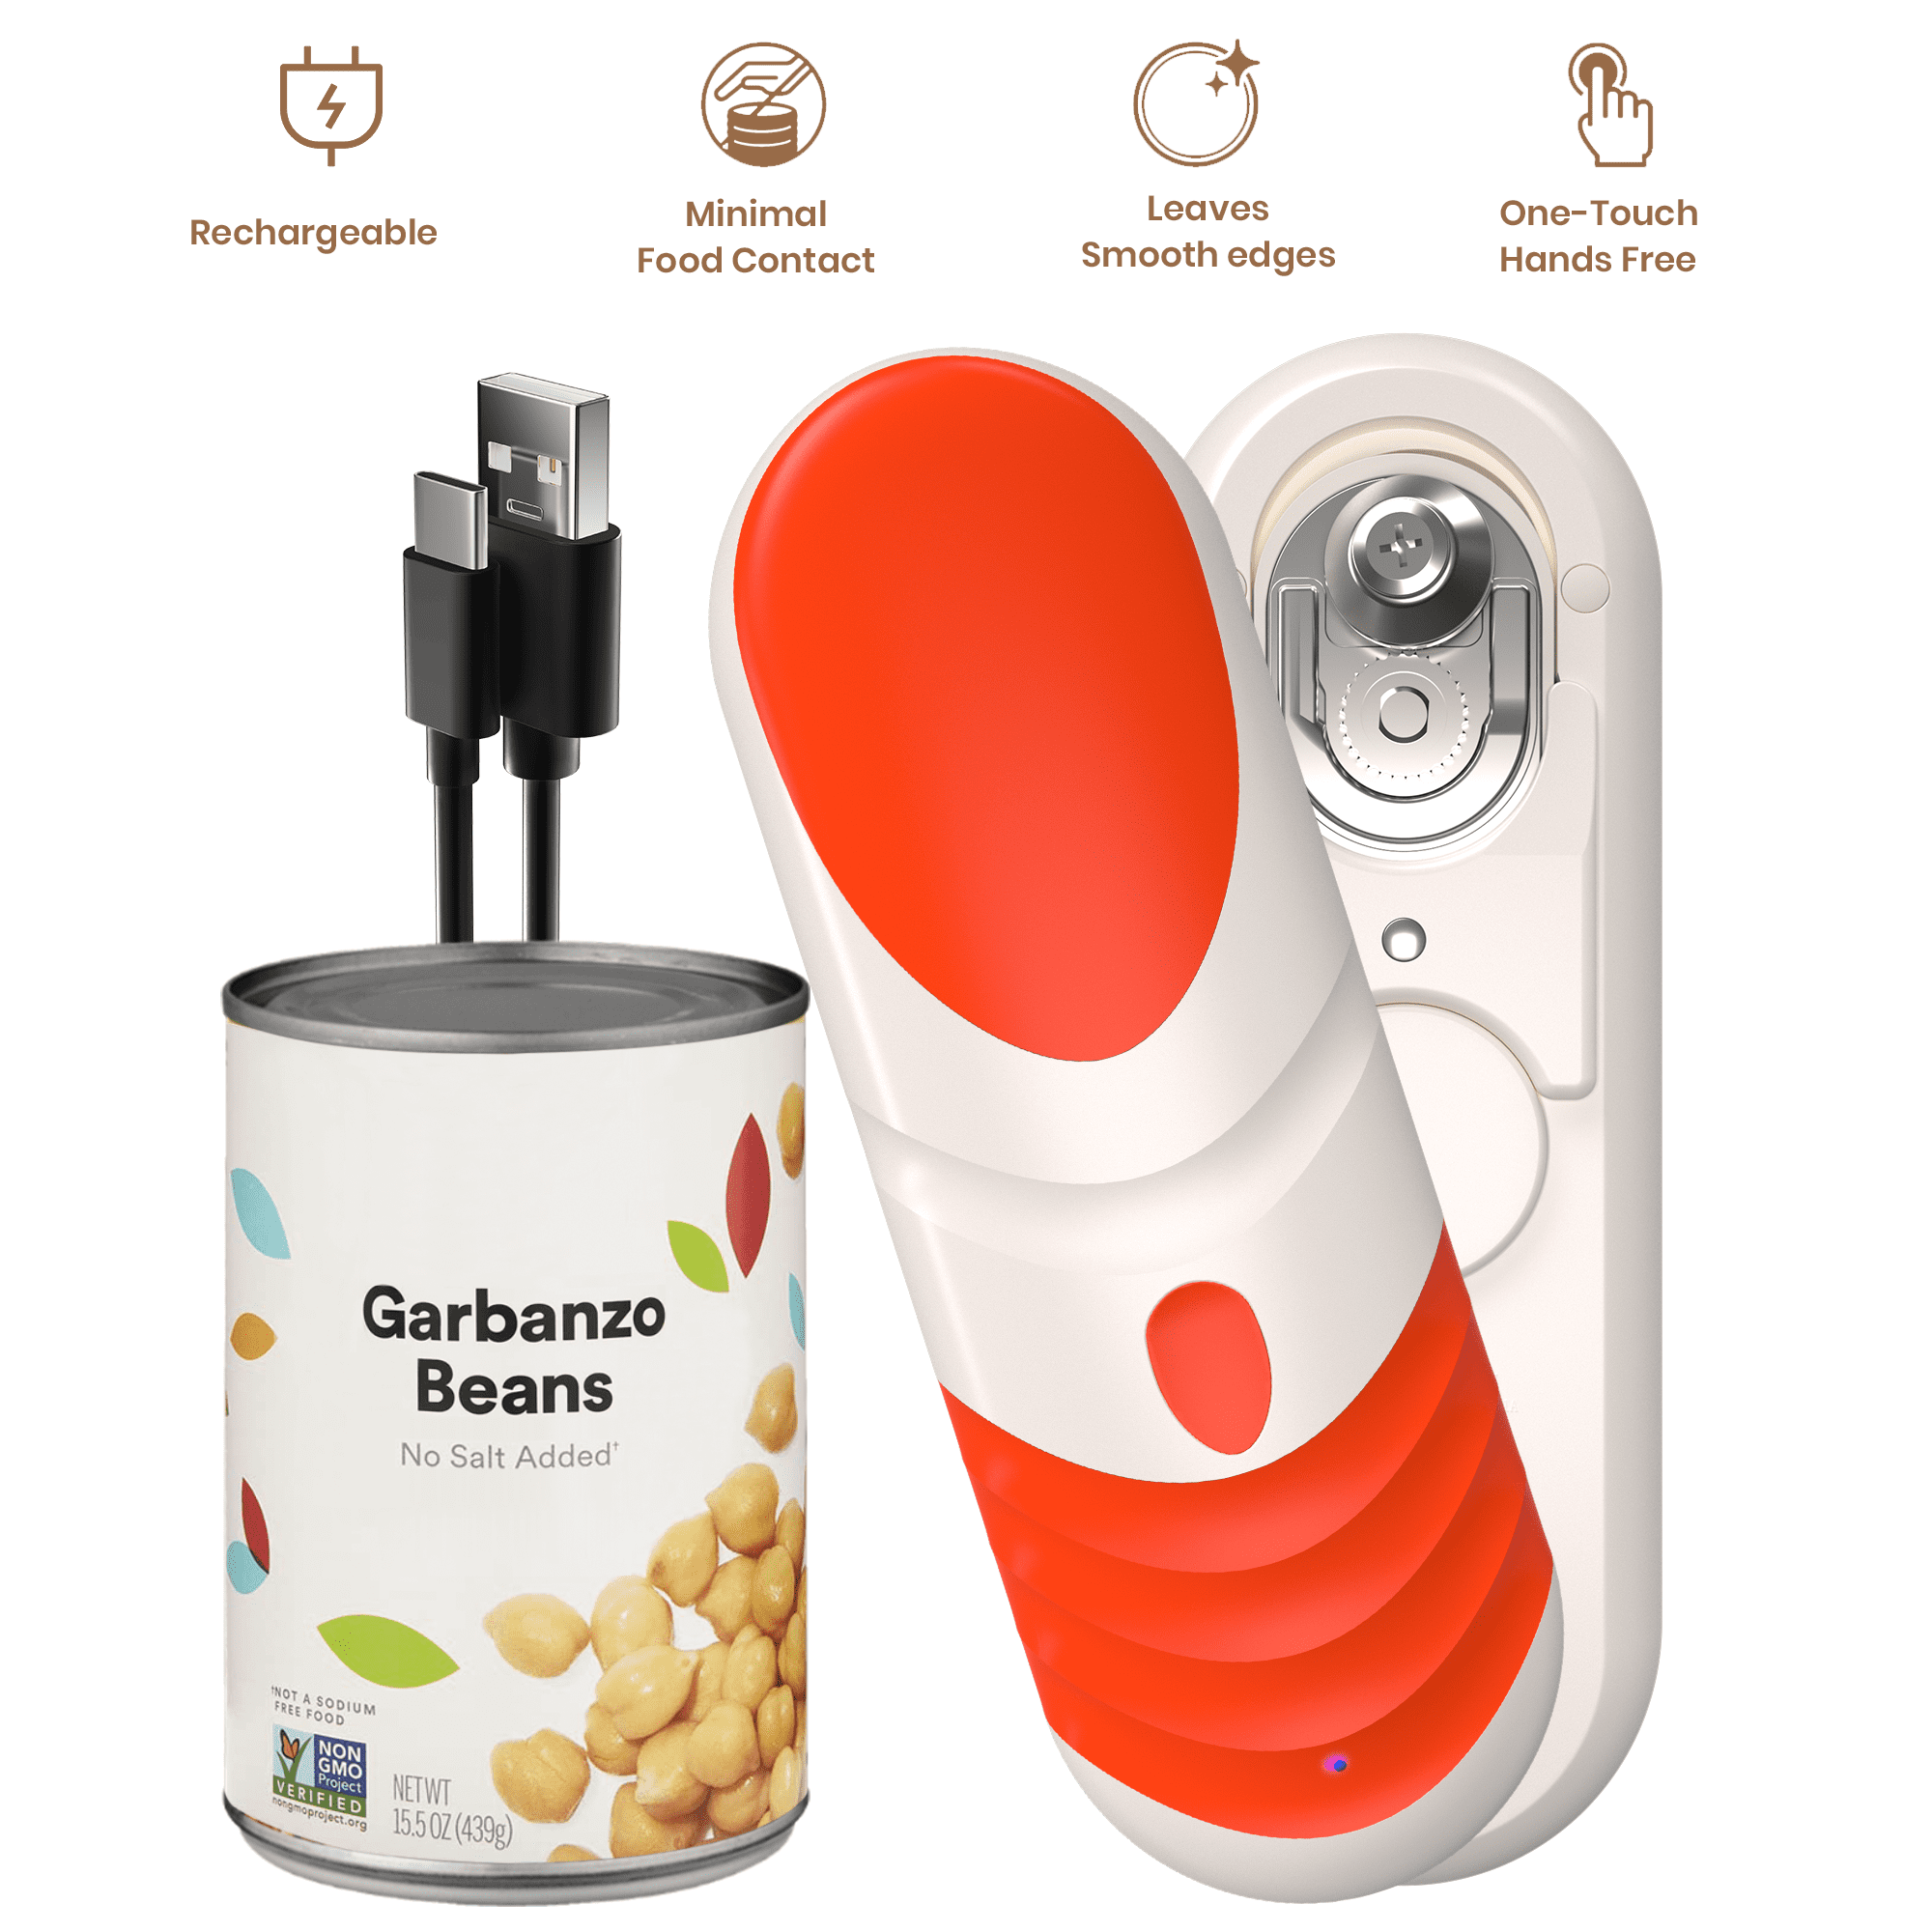 One Touch Hands Free Automatic Can Opener- Red